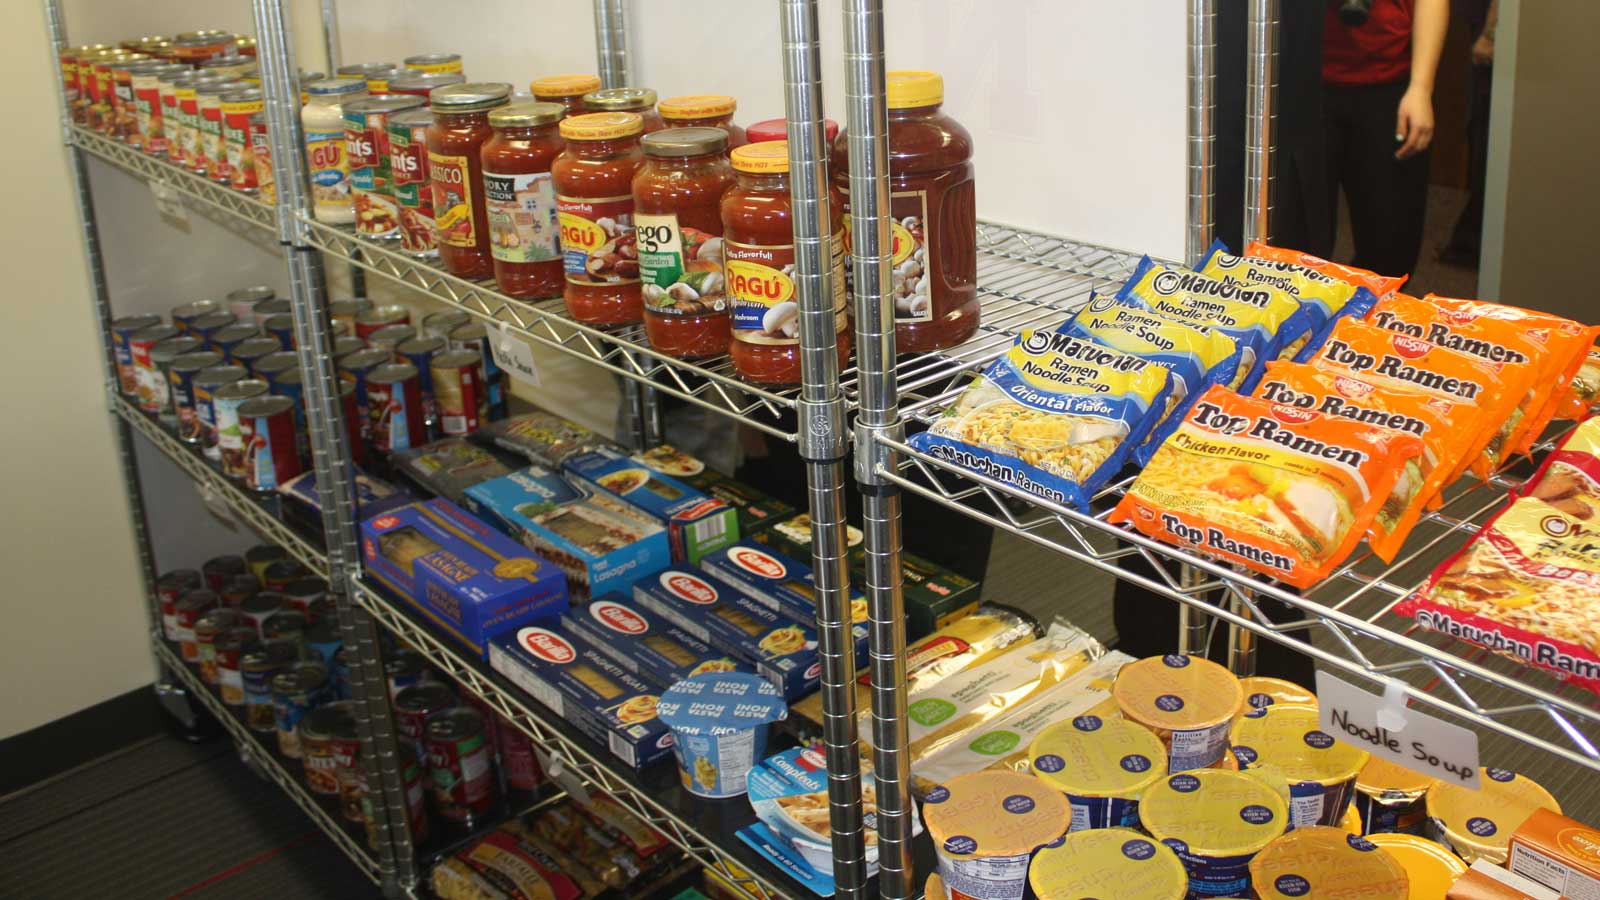 Shelf with pasta sauce, ramen noodles and other products in the on-campus pantry